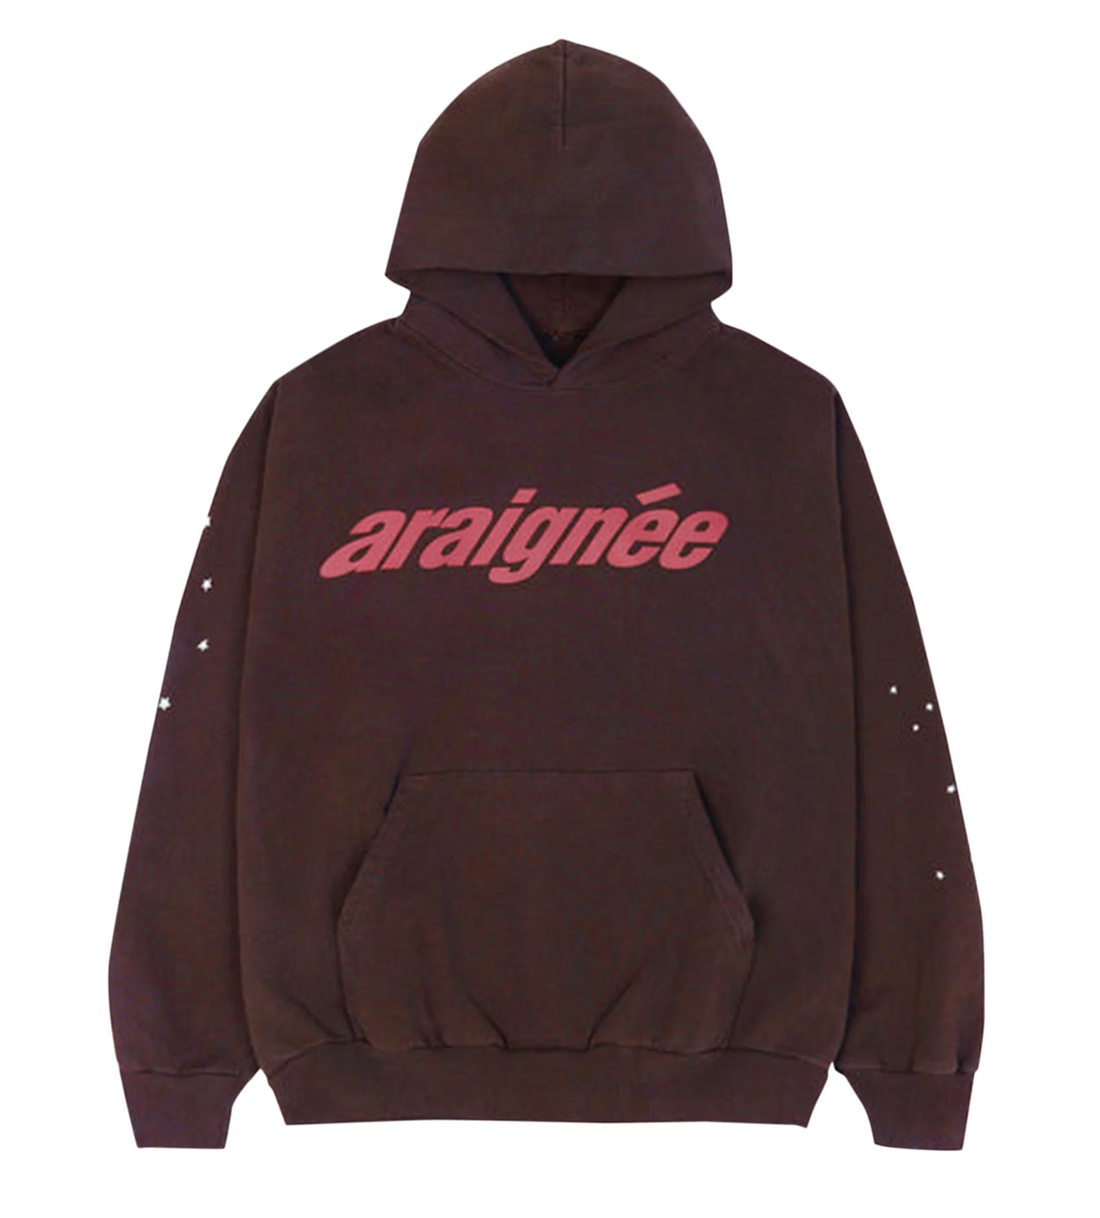 Product Image of Sp5der Arraignee Hoodie Brown Front View